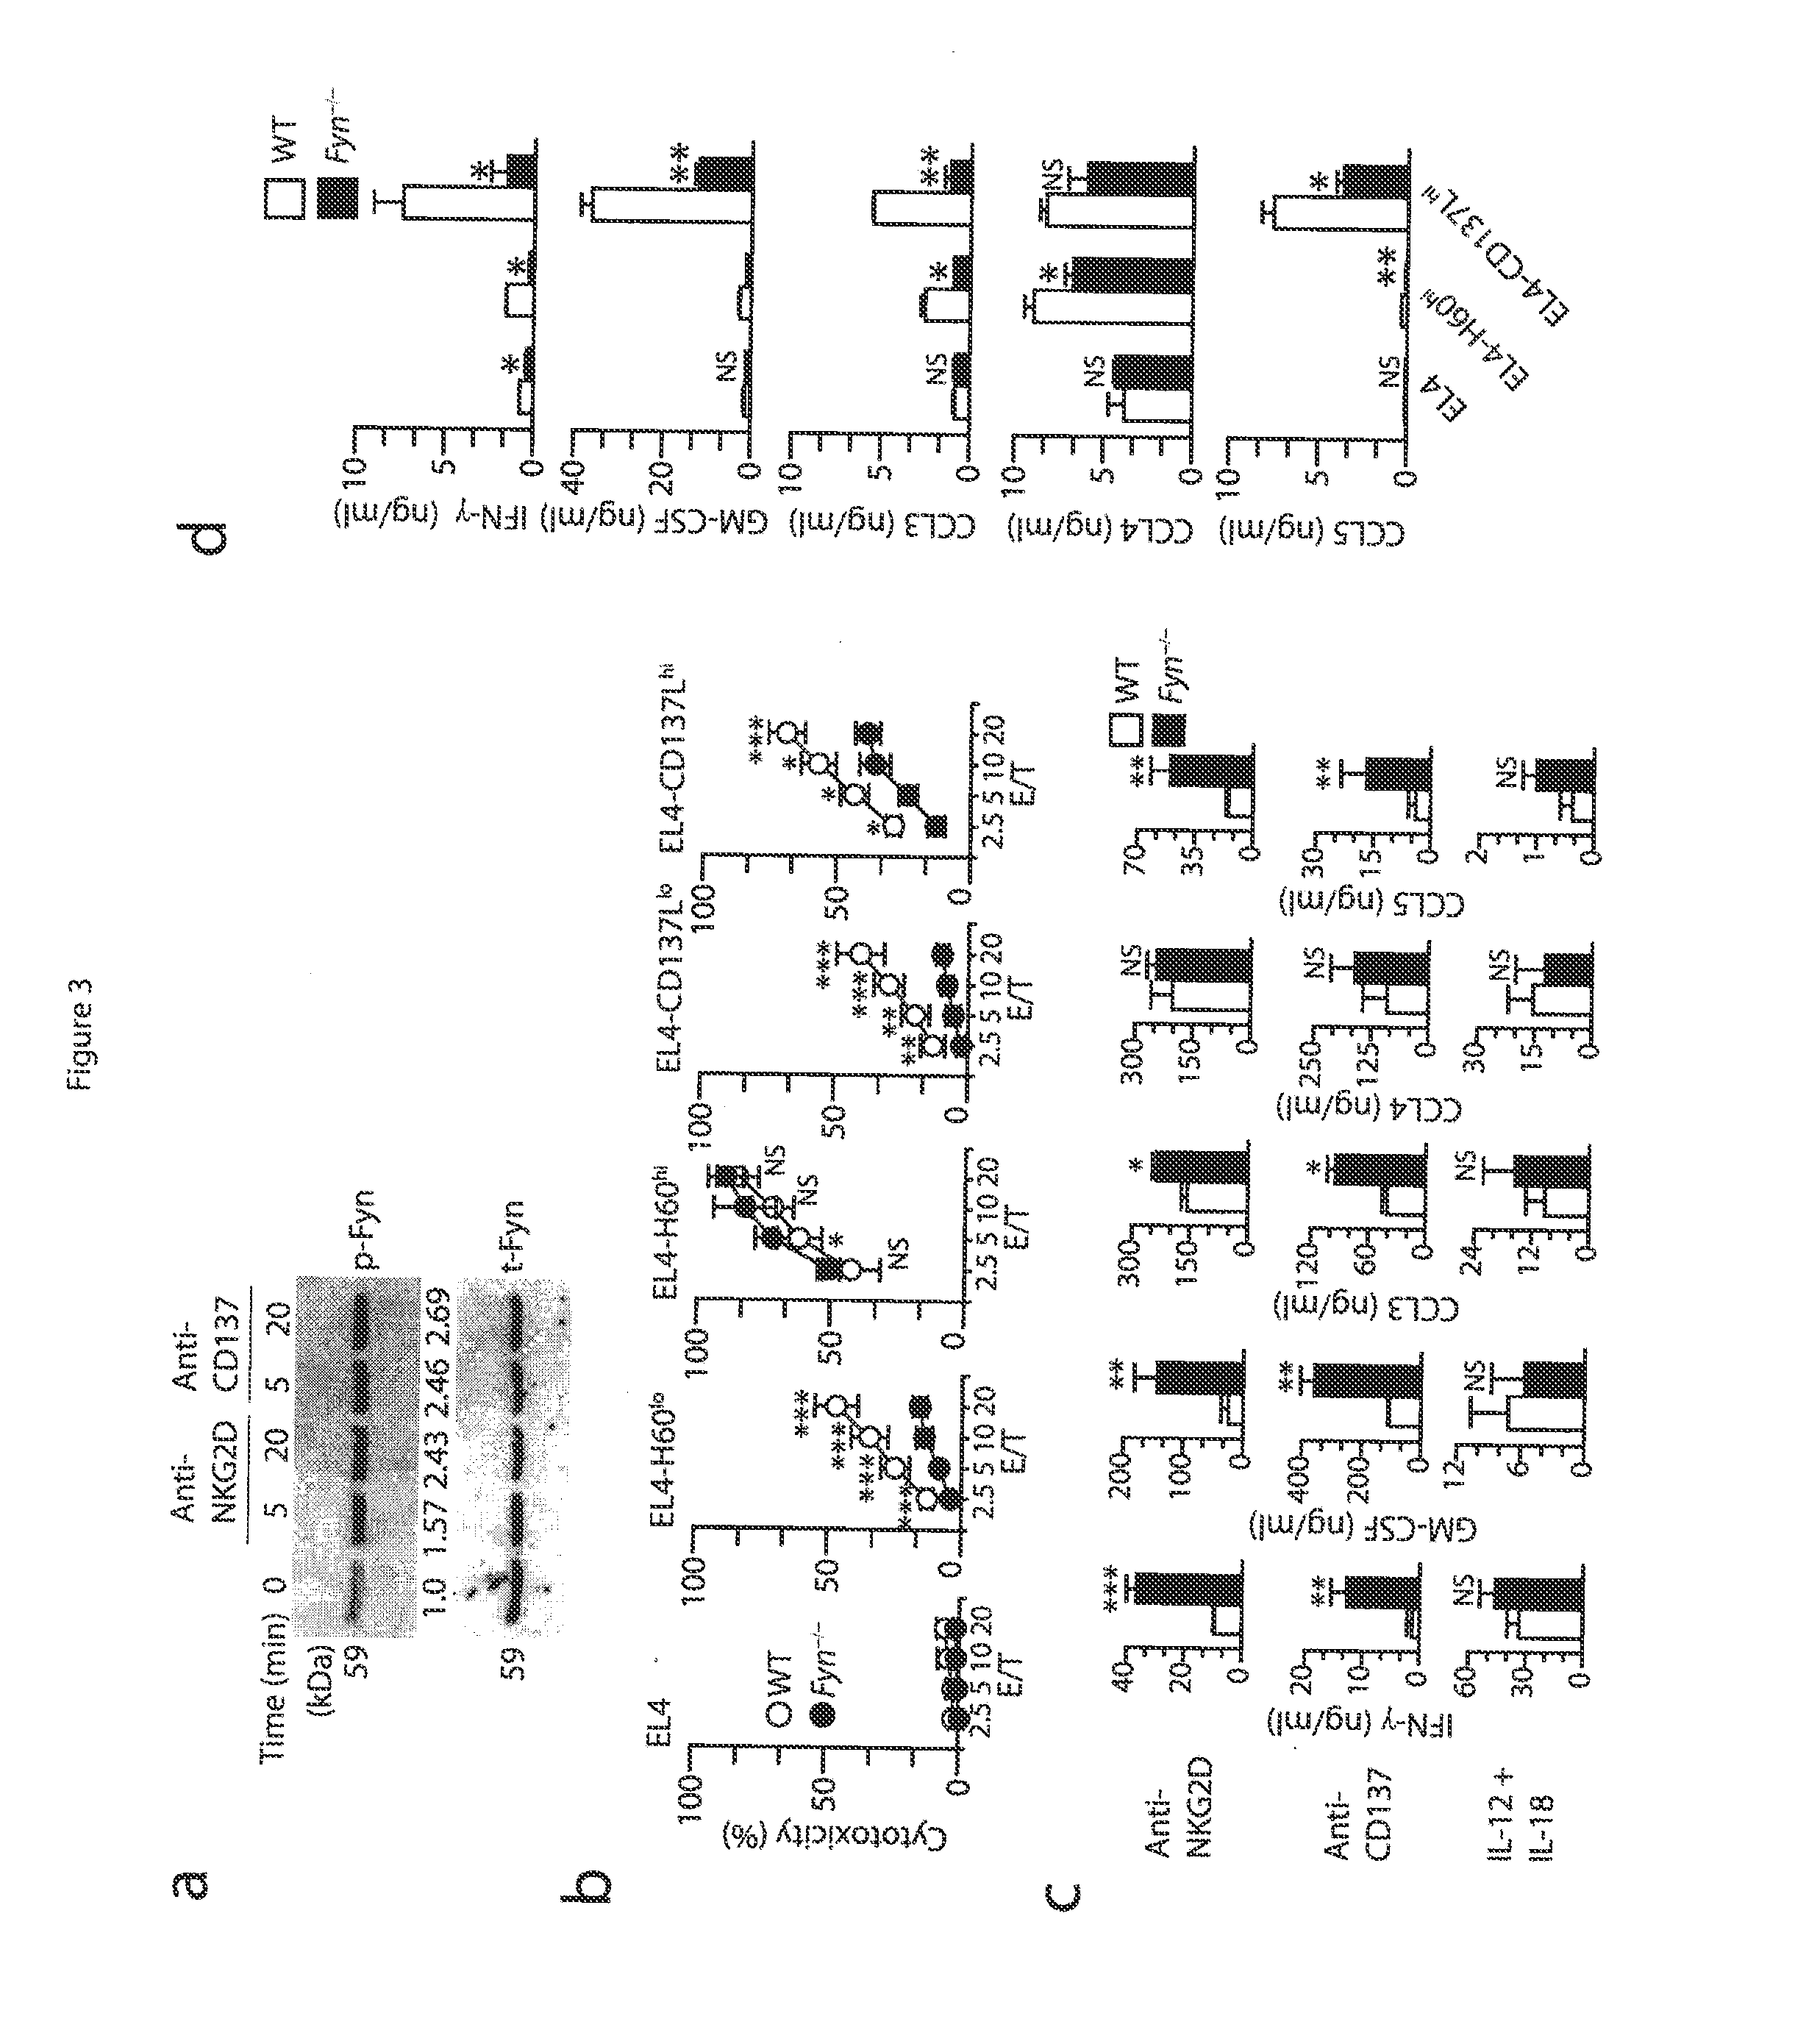 Method of providing cellular therapy using modified natural killer cells or t lymphocytes